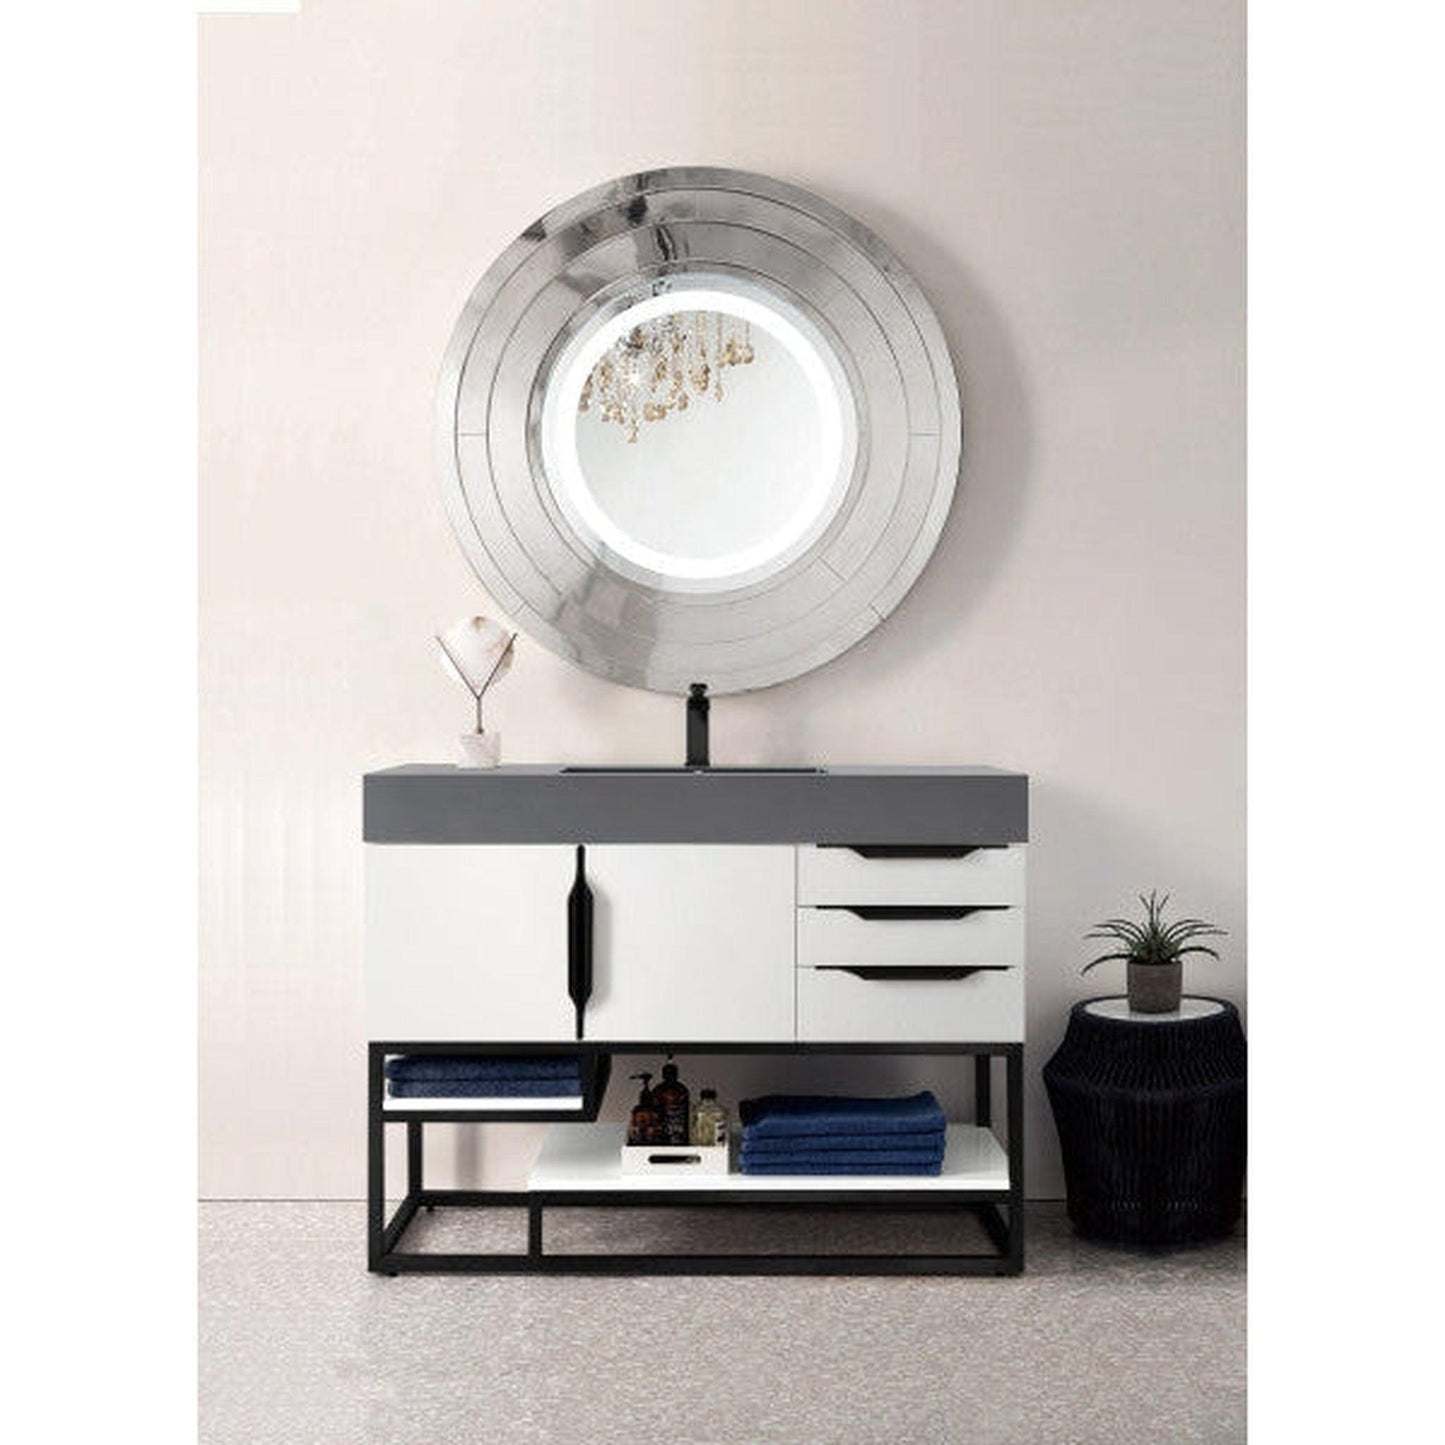 James Martin Columbia 48" Single Glossy White Bathroom Vanity With Matte Black Hardware and 6" Glossy Dusk Gray Composite Countertop